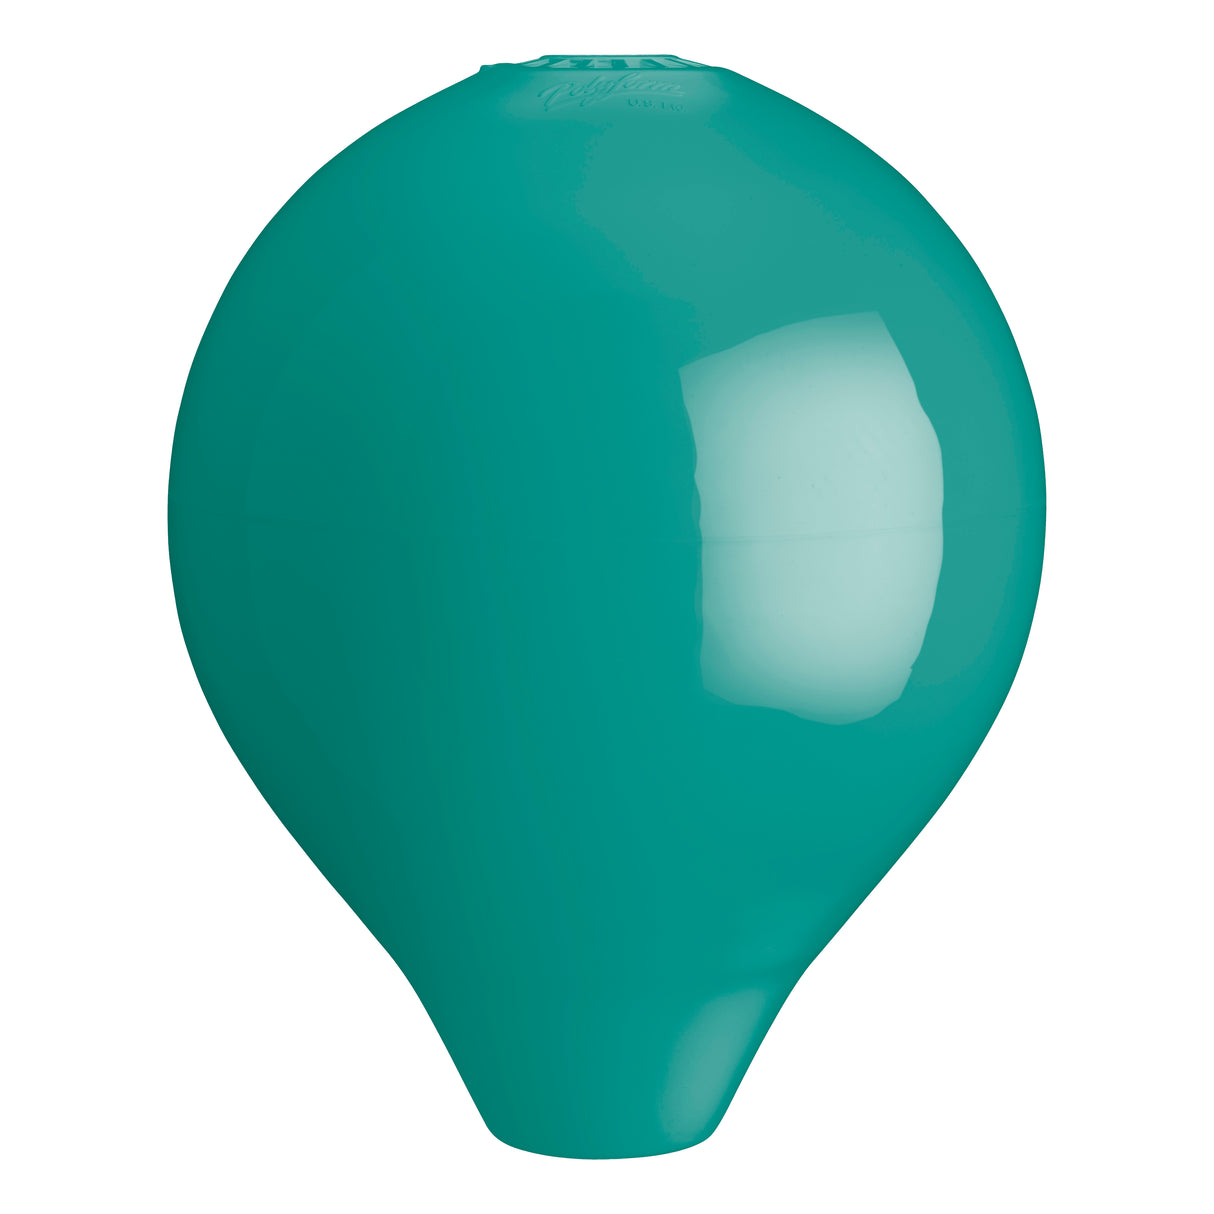 Hole through center mooring and marker buoy, Polyform CC-3 Teal